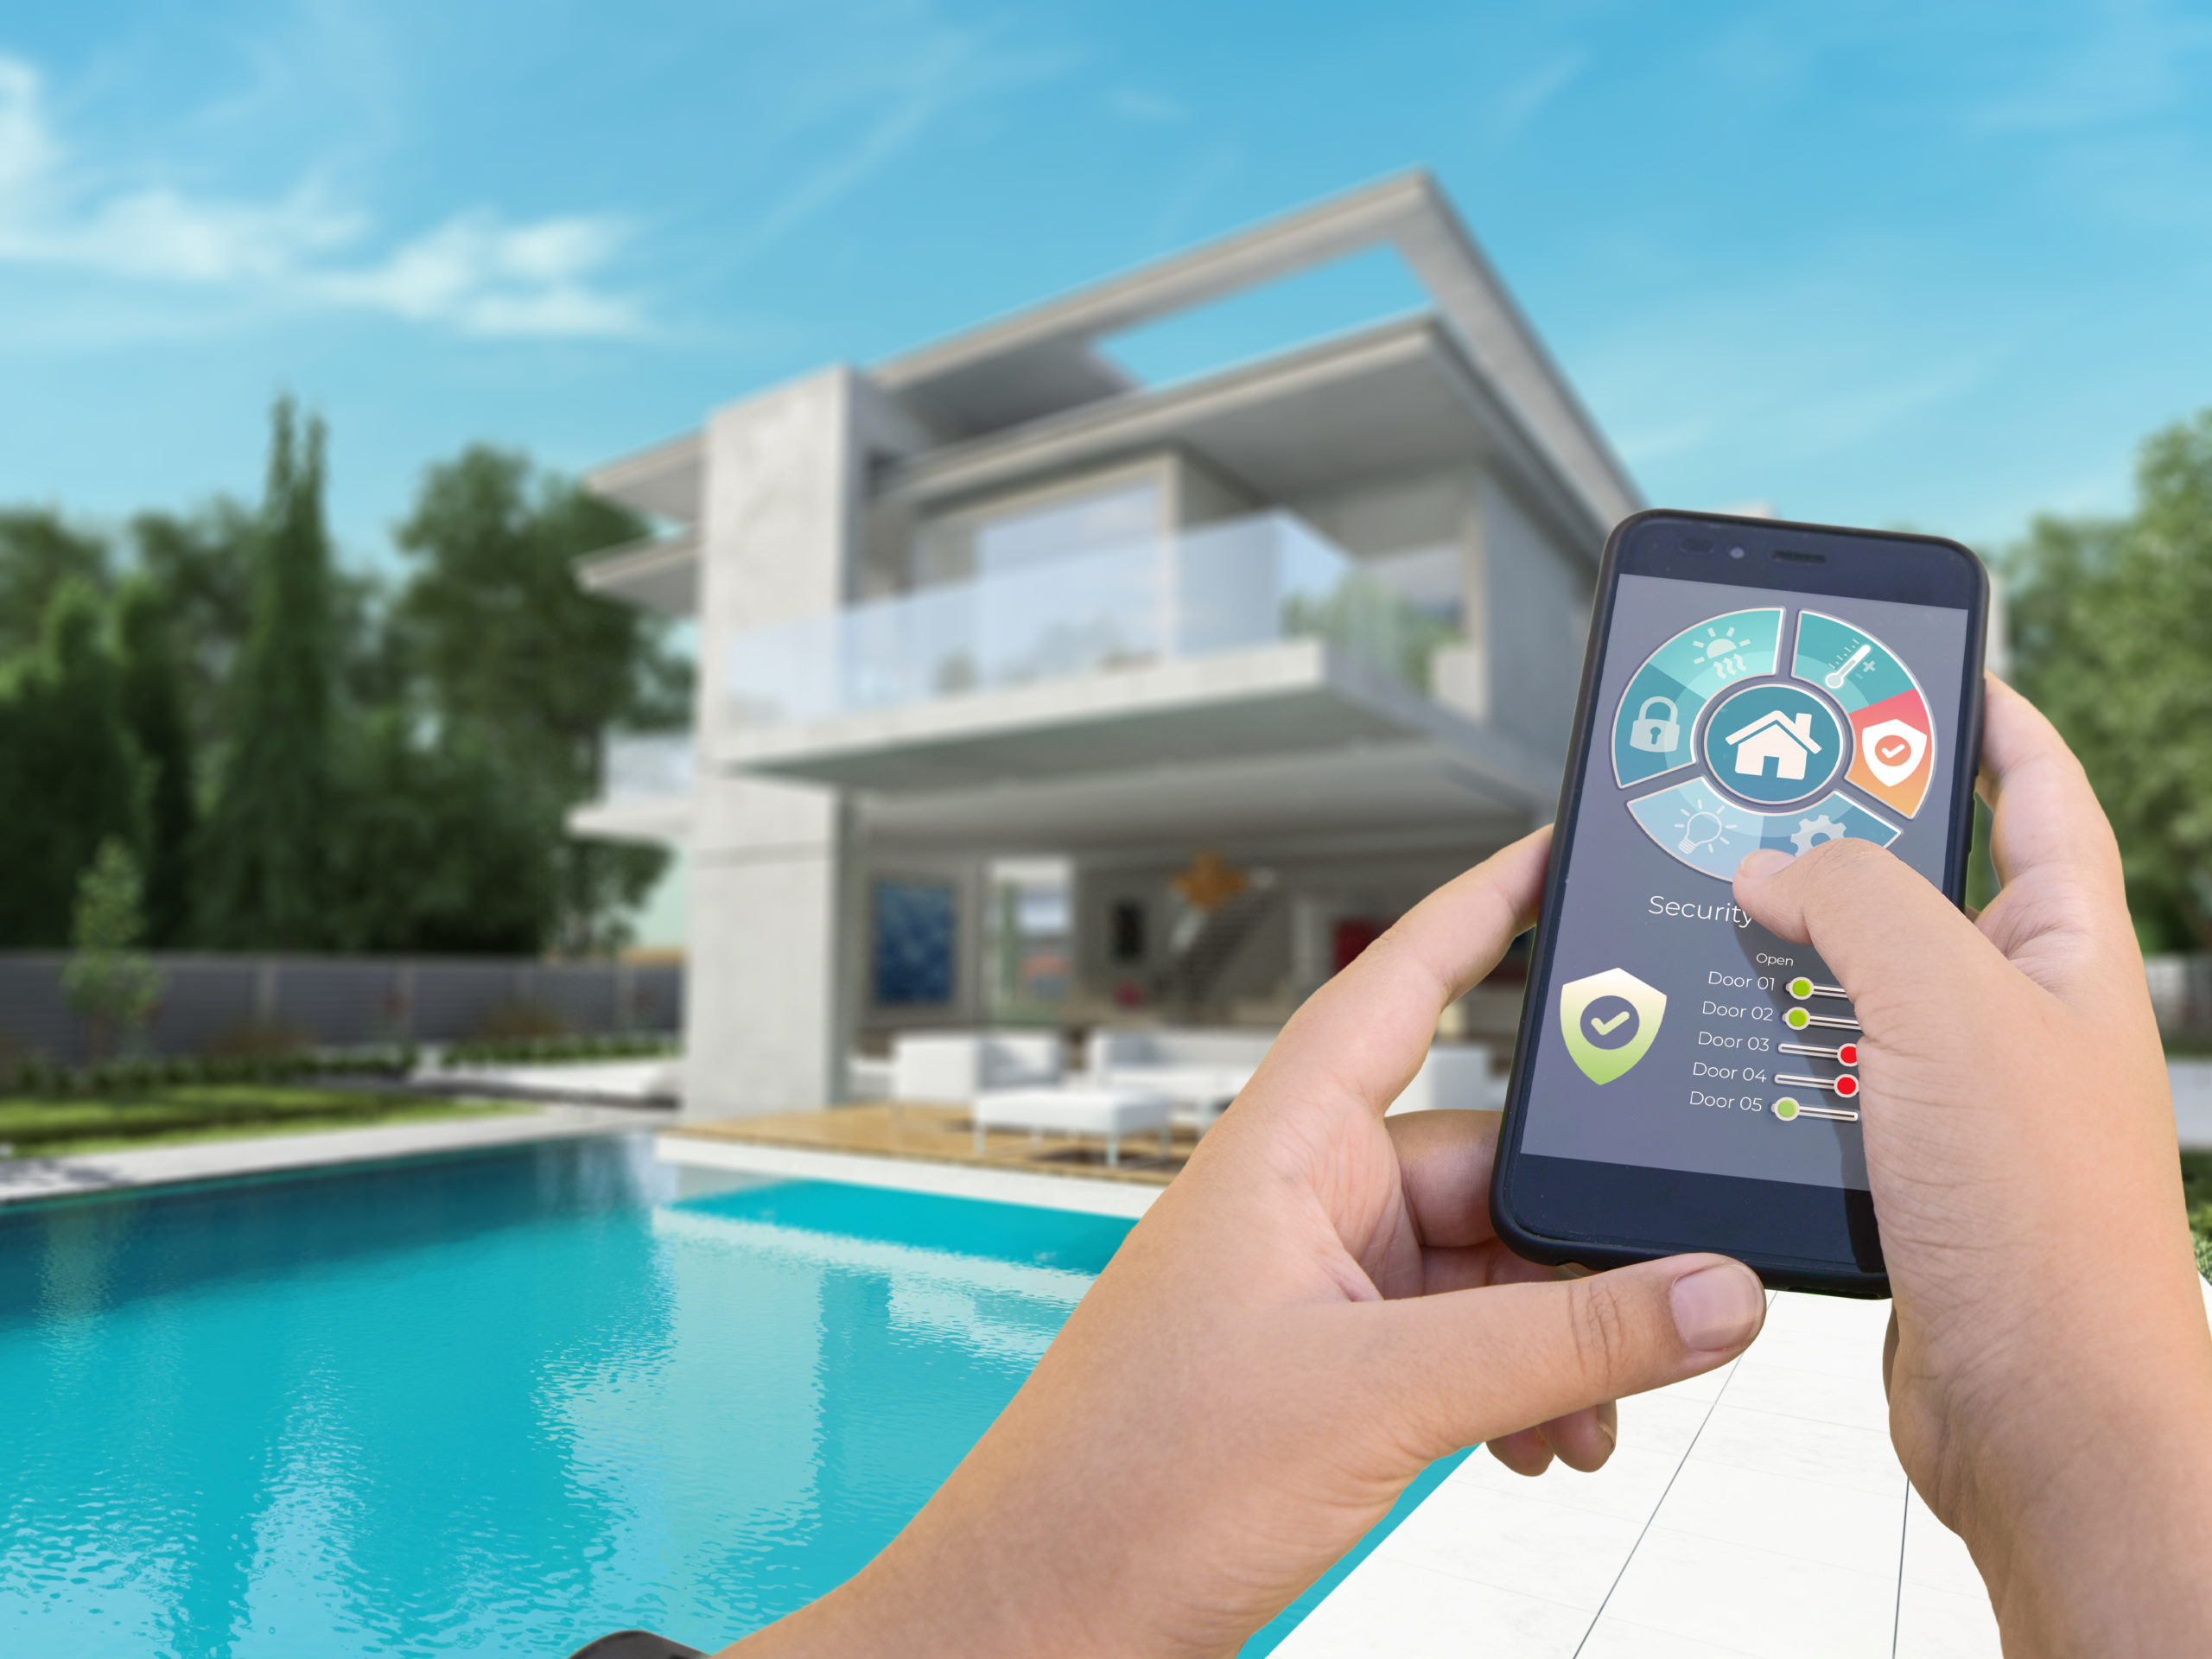 Smart device for pool automation, allowing remote control and monitoring of pool functions such as filtration, temperature, and lighting via a smartphone or other connected devices.